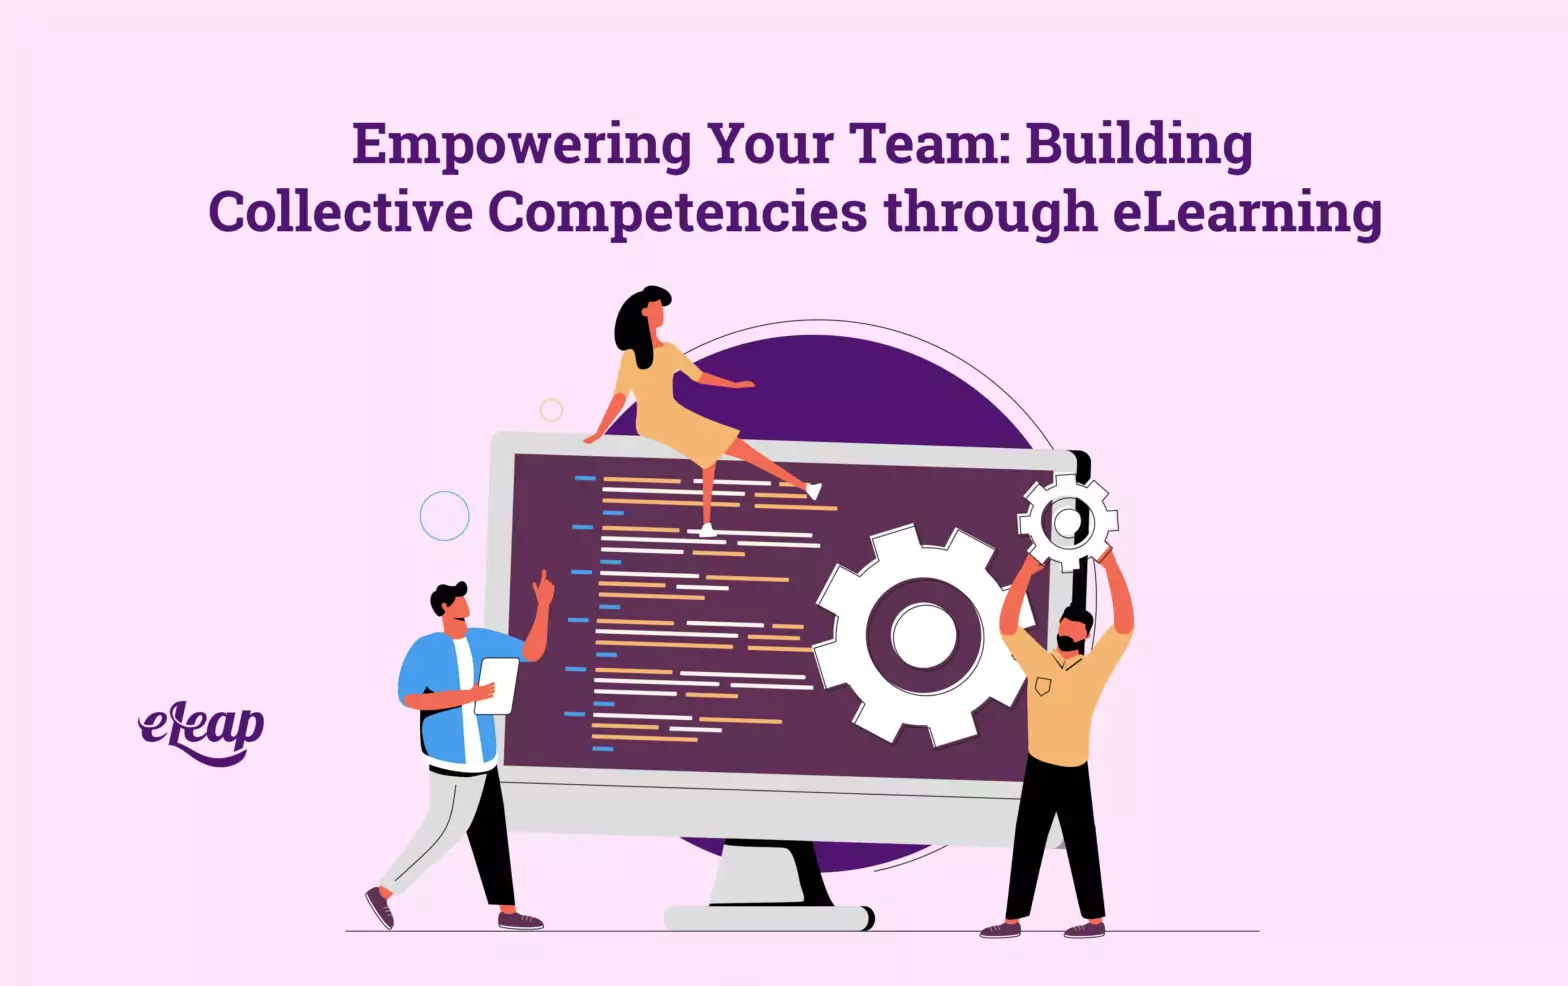 Empowering Your Team: Building Collective Competencies through eLearning